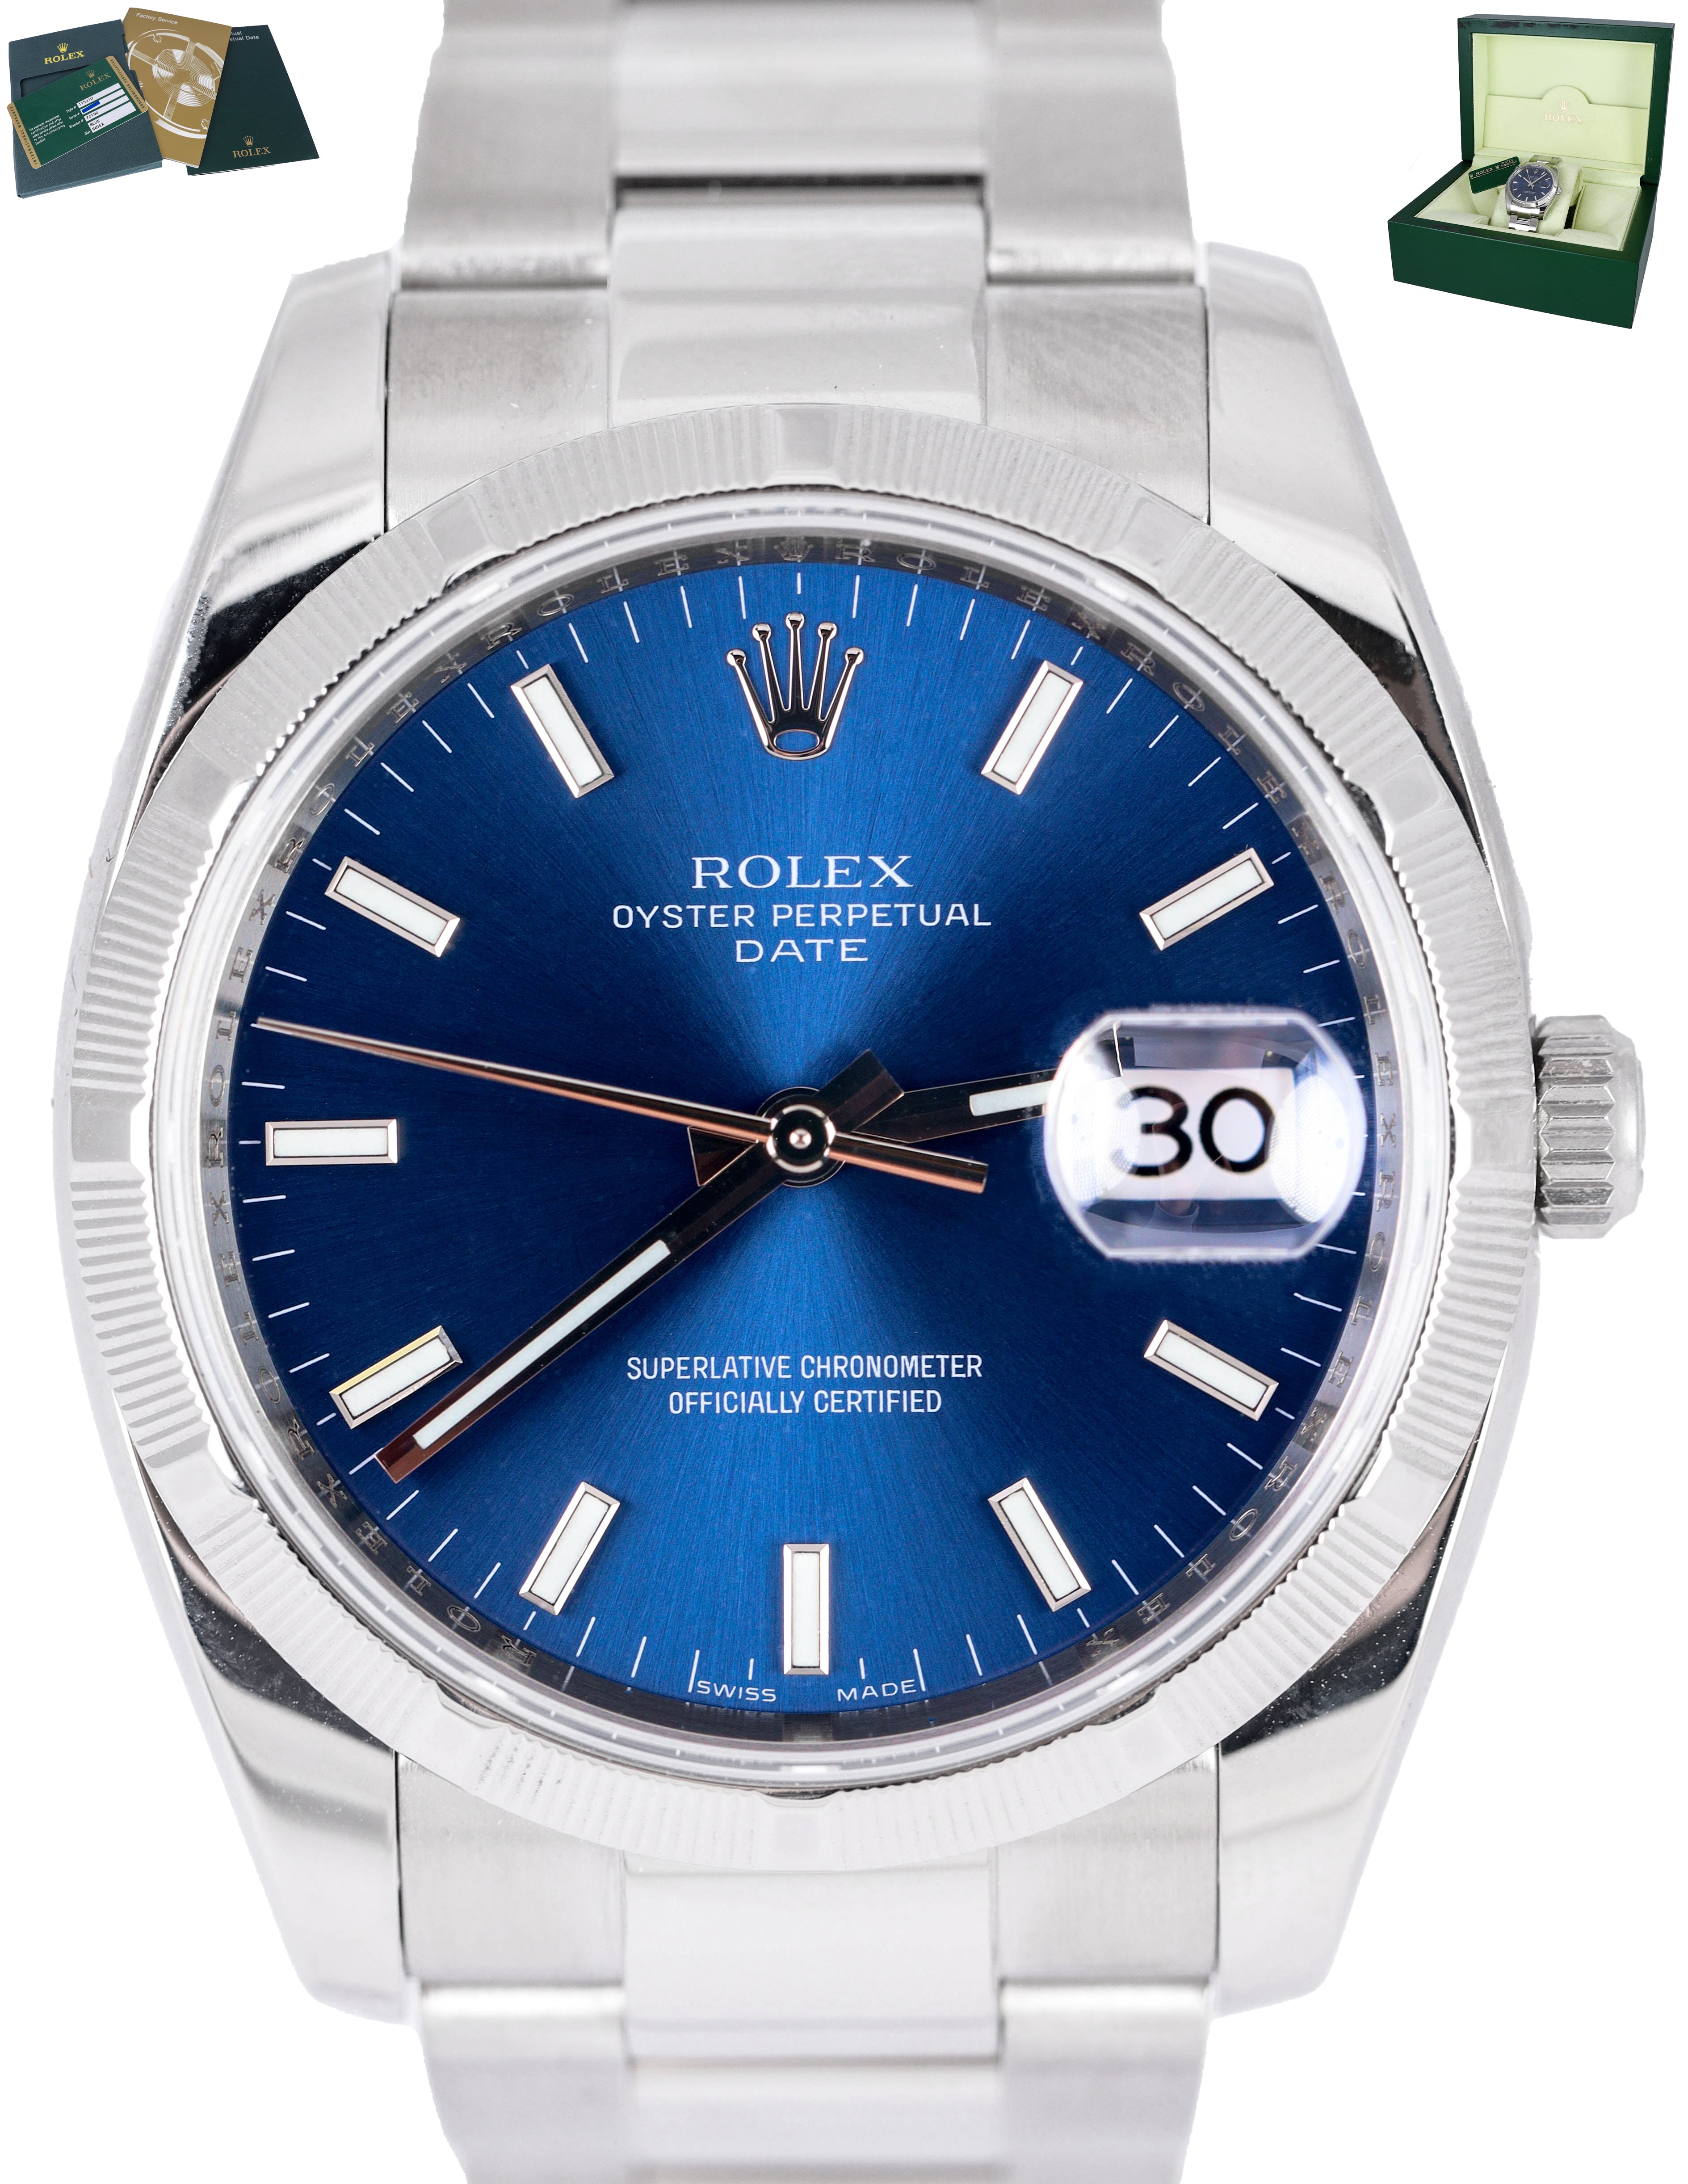 MINT 2012 Rolex Oyster Perpetual Date 36 Blue 115210 Stainless Steel 36MM Watch